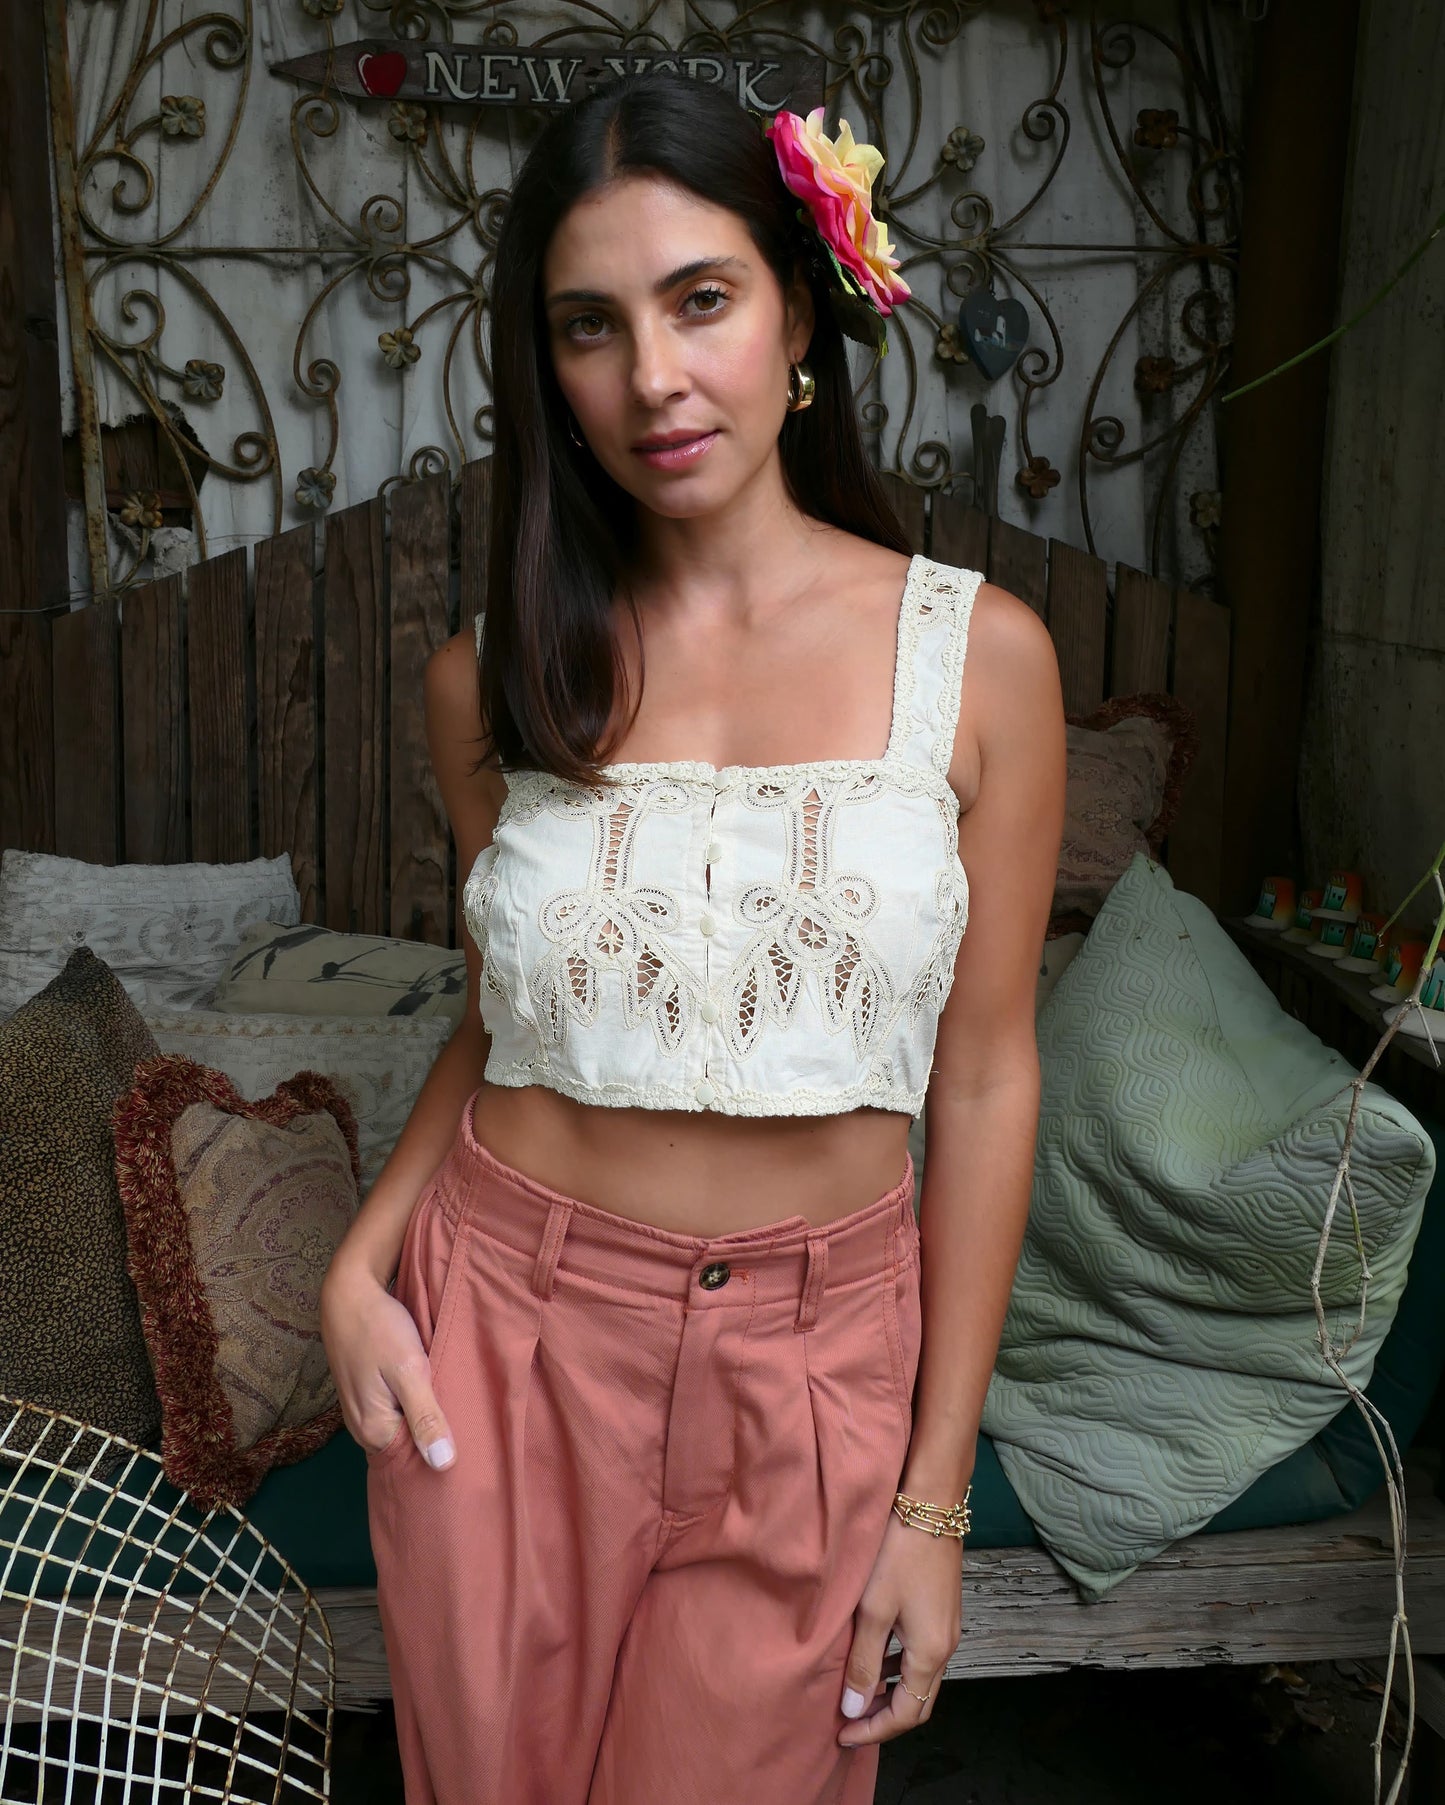 Romantic vintage Battenberg lace meets Boho Chic in this ultra-cute bra top.  Wear it alone with jeans, linen pants, or a skirt, or pair it with our Battenberg lace skirt (buy them as a set in our 2-piece set Collection).  Has secure buttons and hooks in the front to ensure there are no noticeable gaps.  Color: Natural